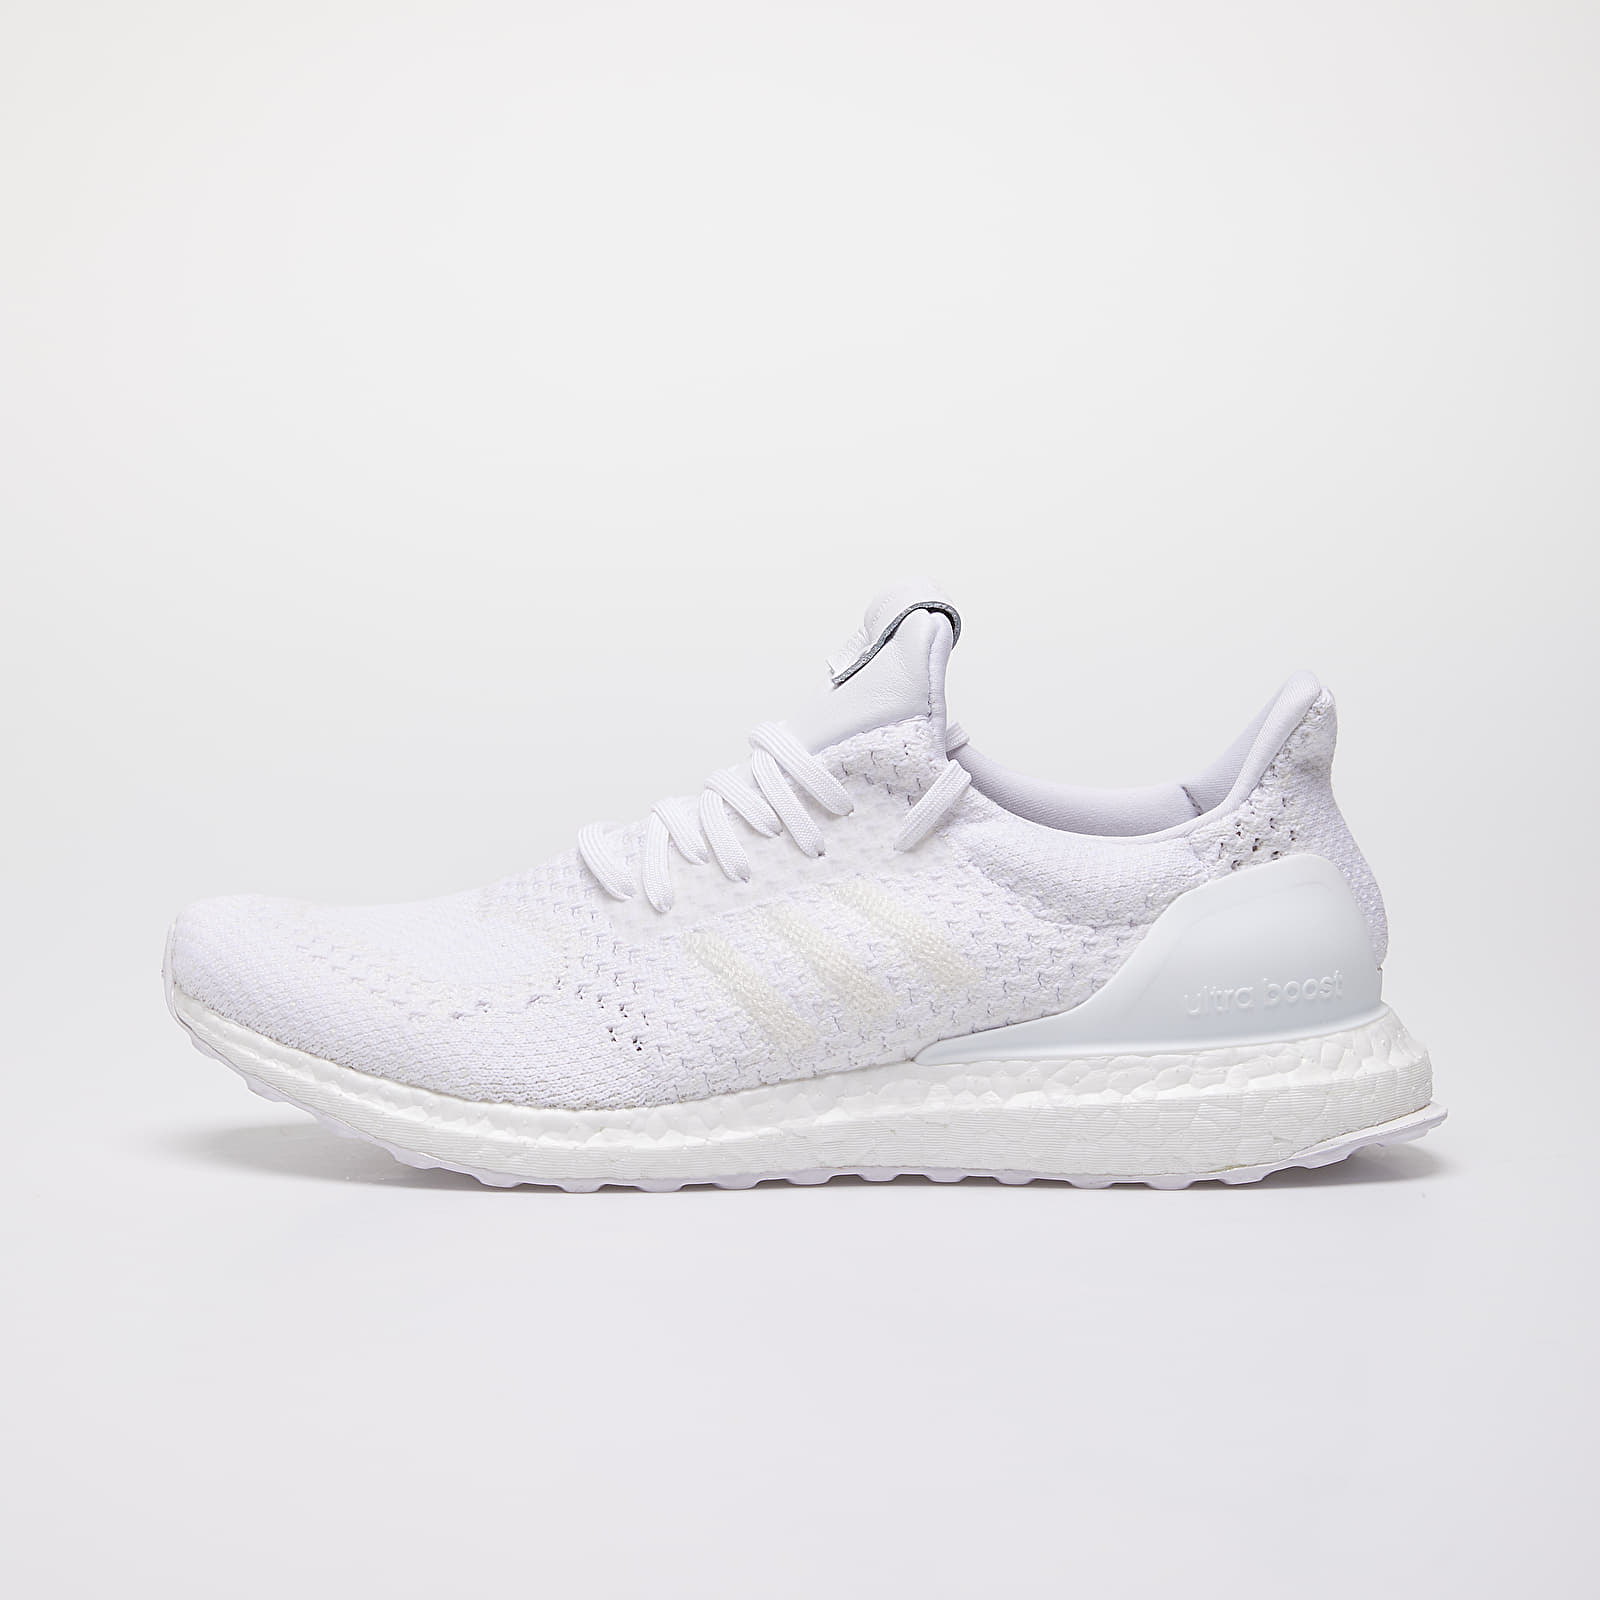 Men's shoes adidas Consortium x A Ma Maniére X Invincible Ultraboost Crystal White/ Crystal White/ Crystal White